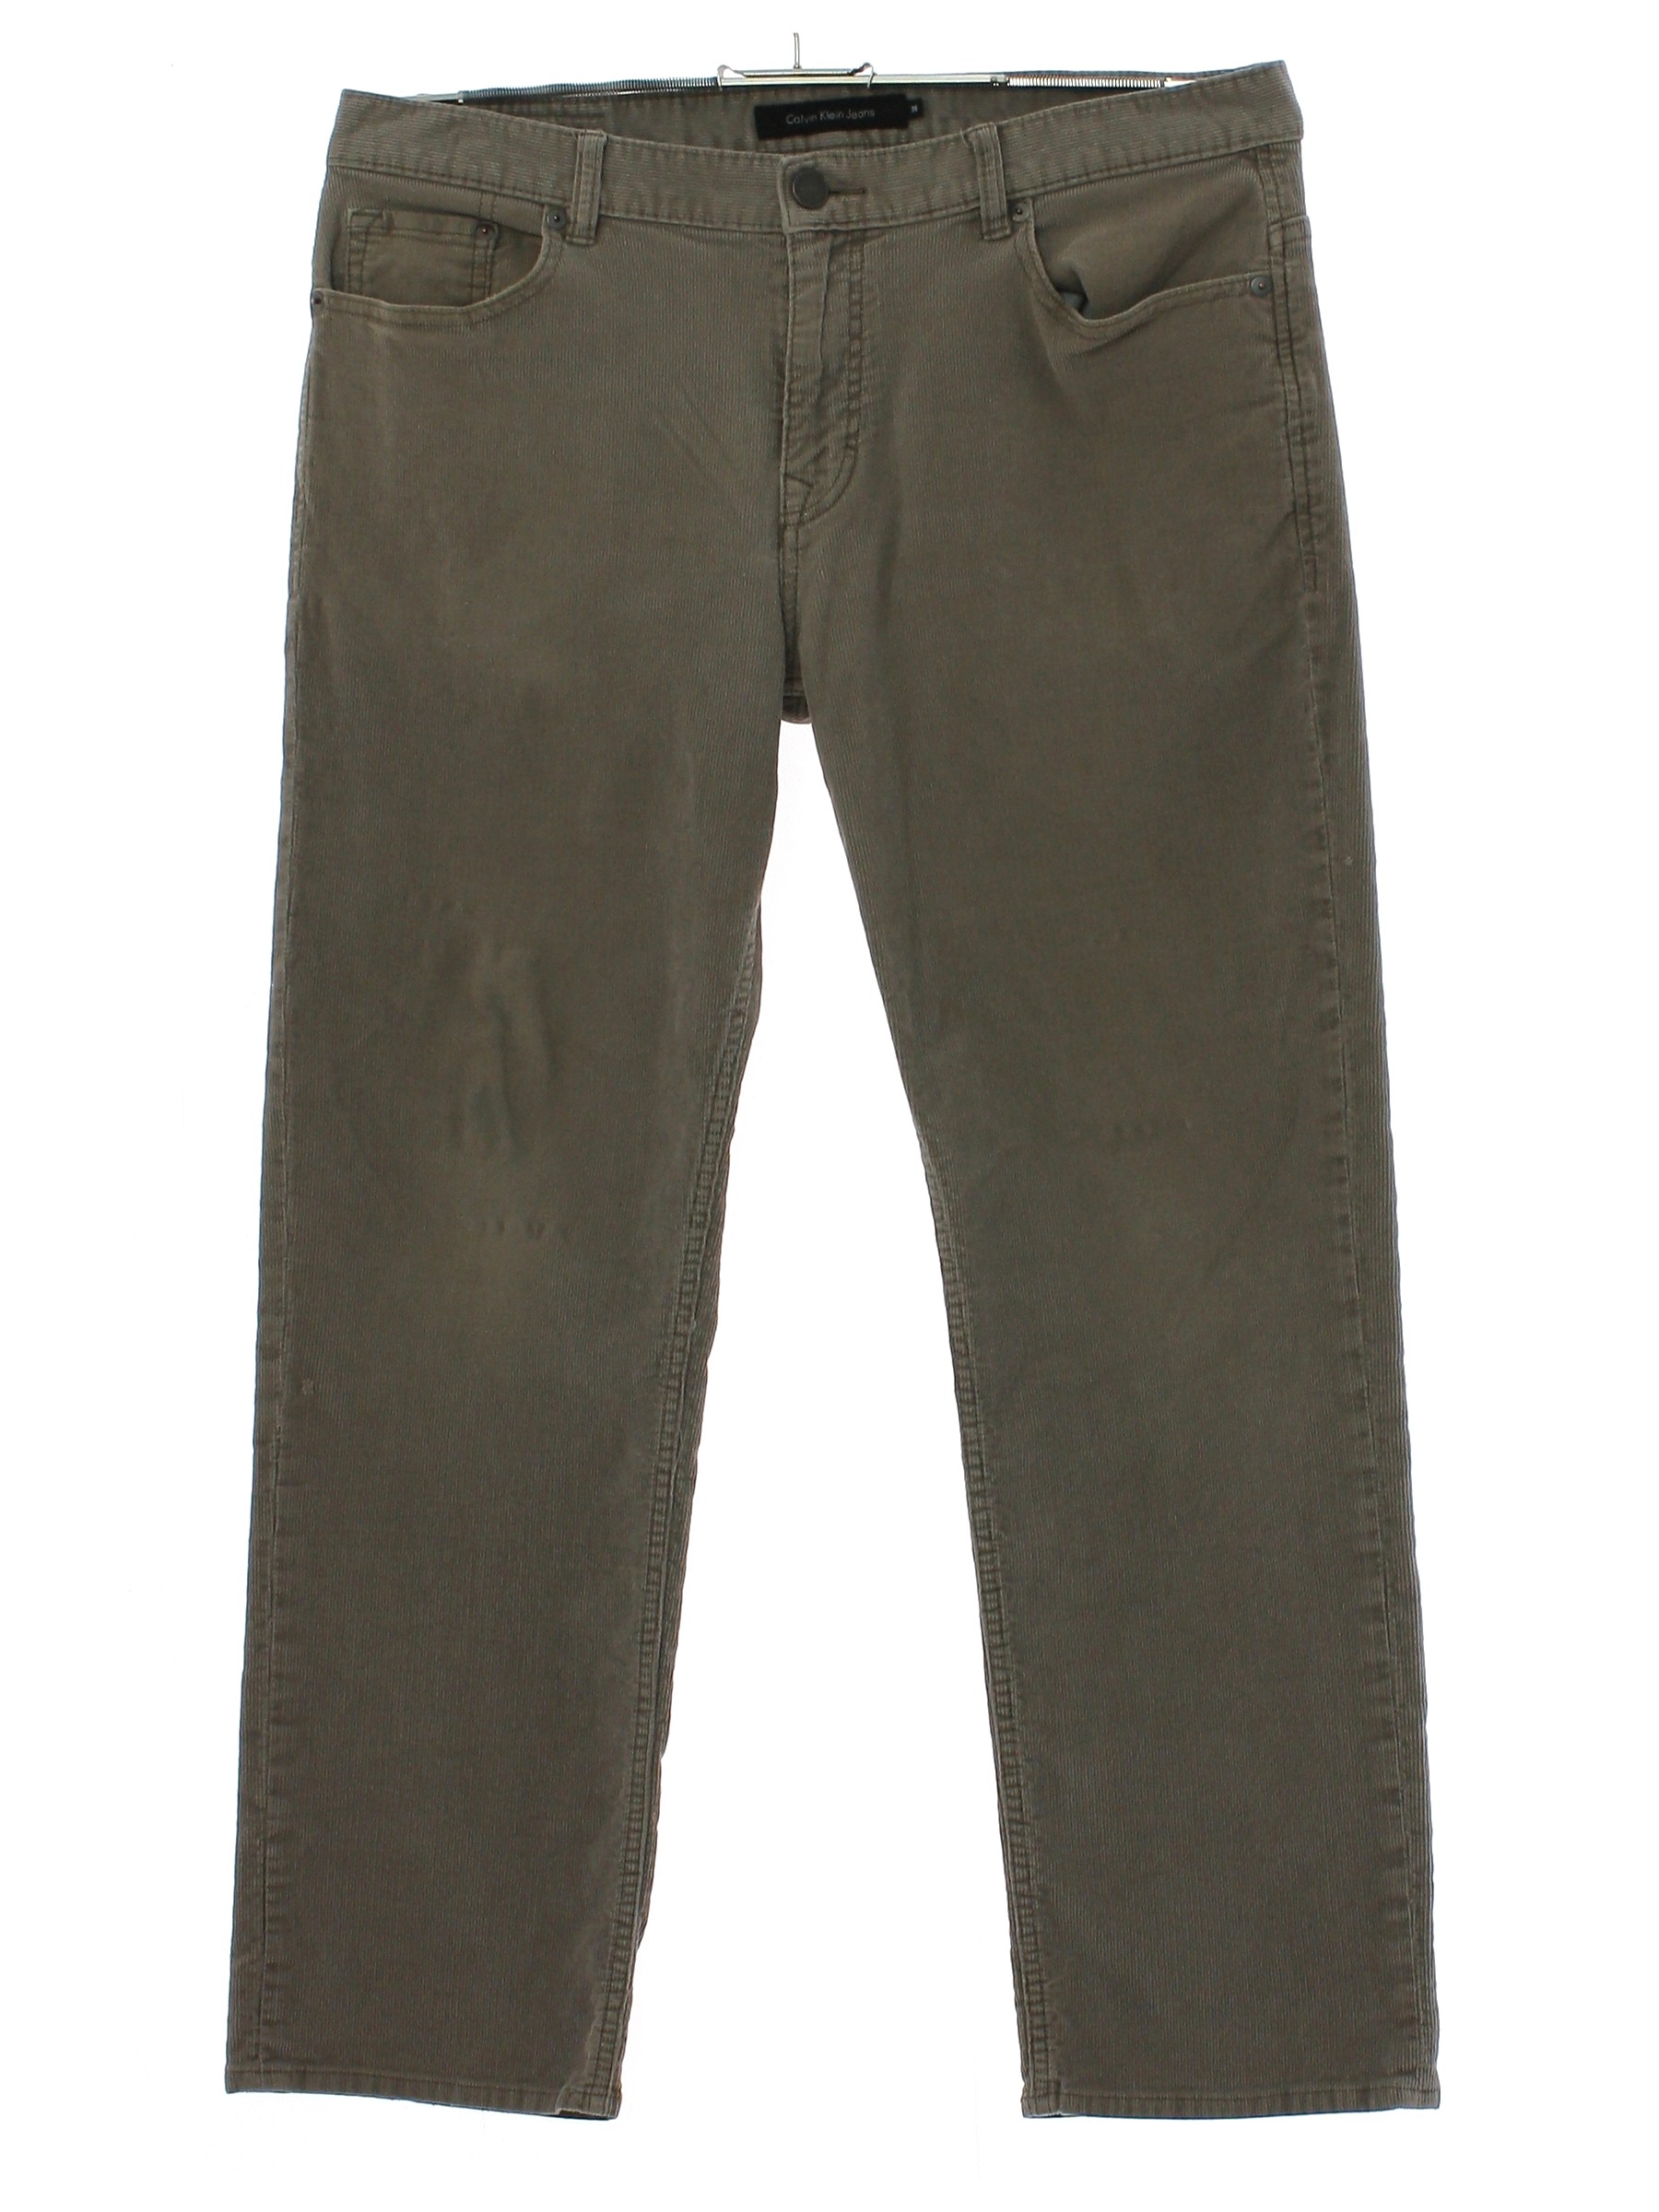 Pants: 90s -Calvin Klein- Mens tannish gray solid colored cotton ...